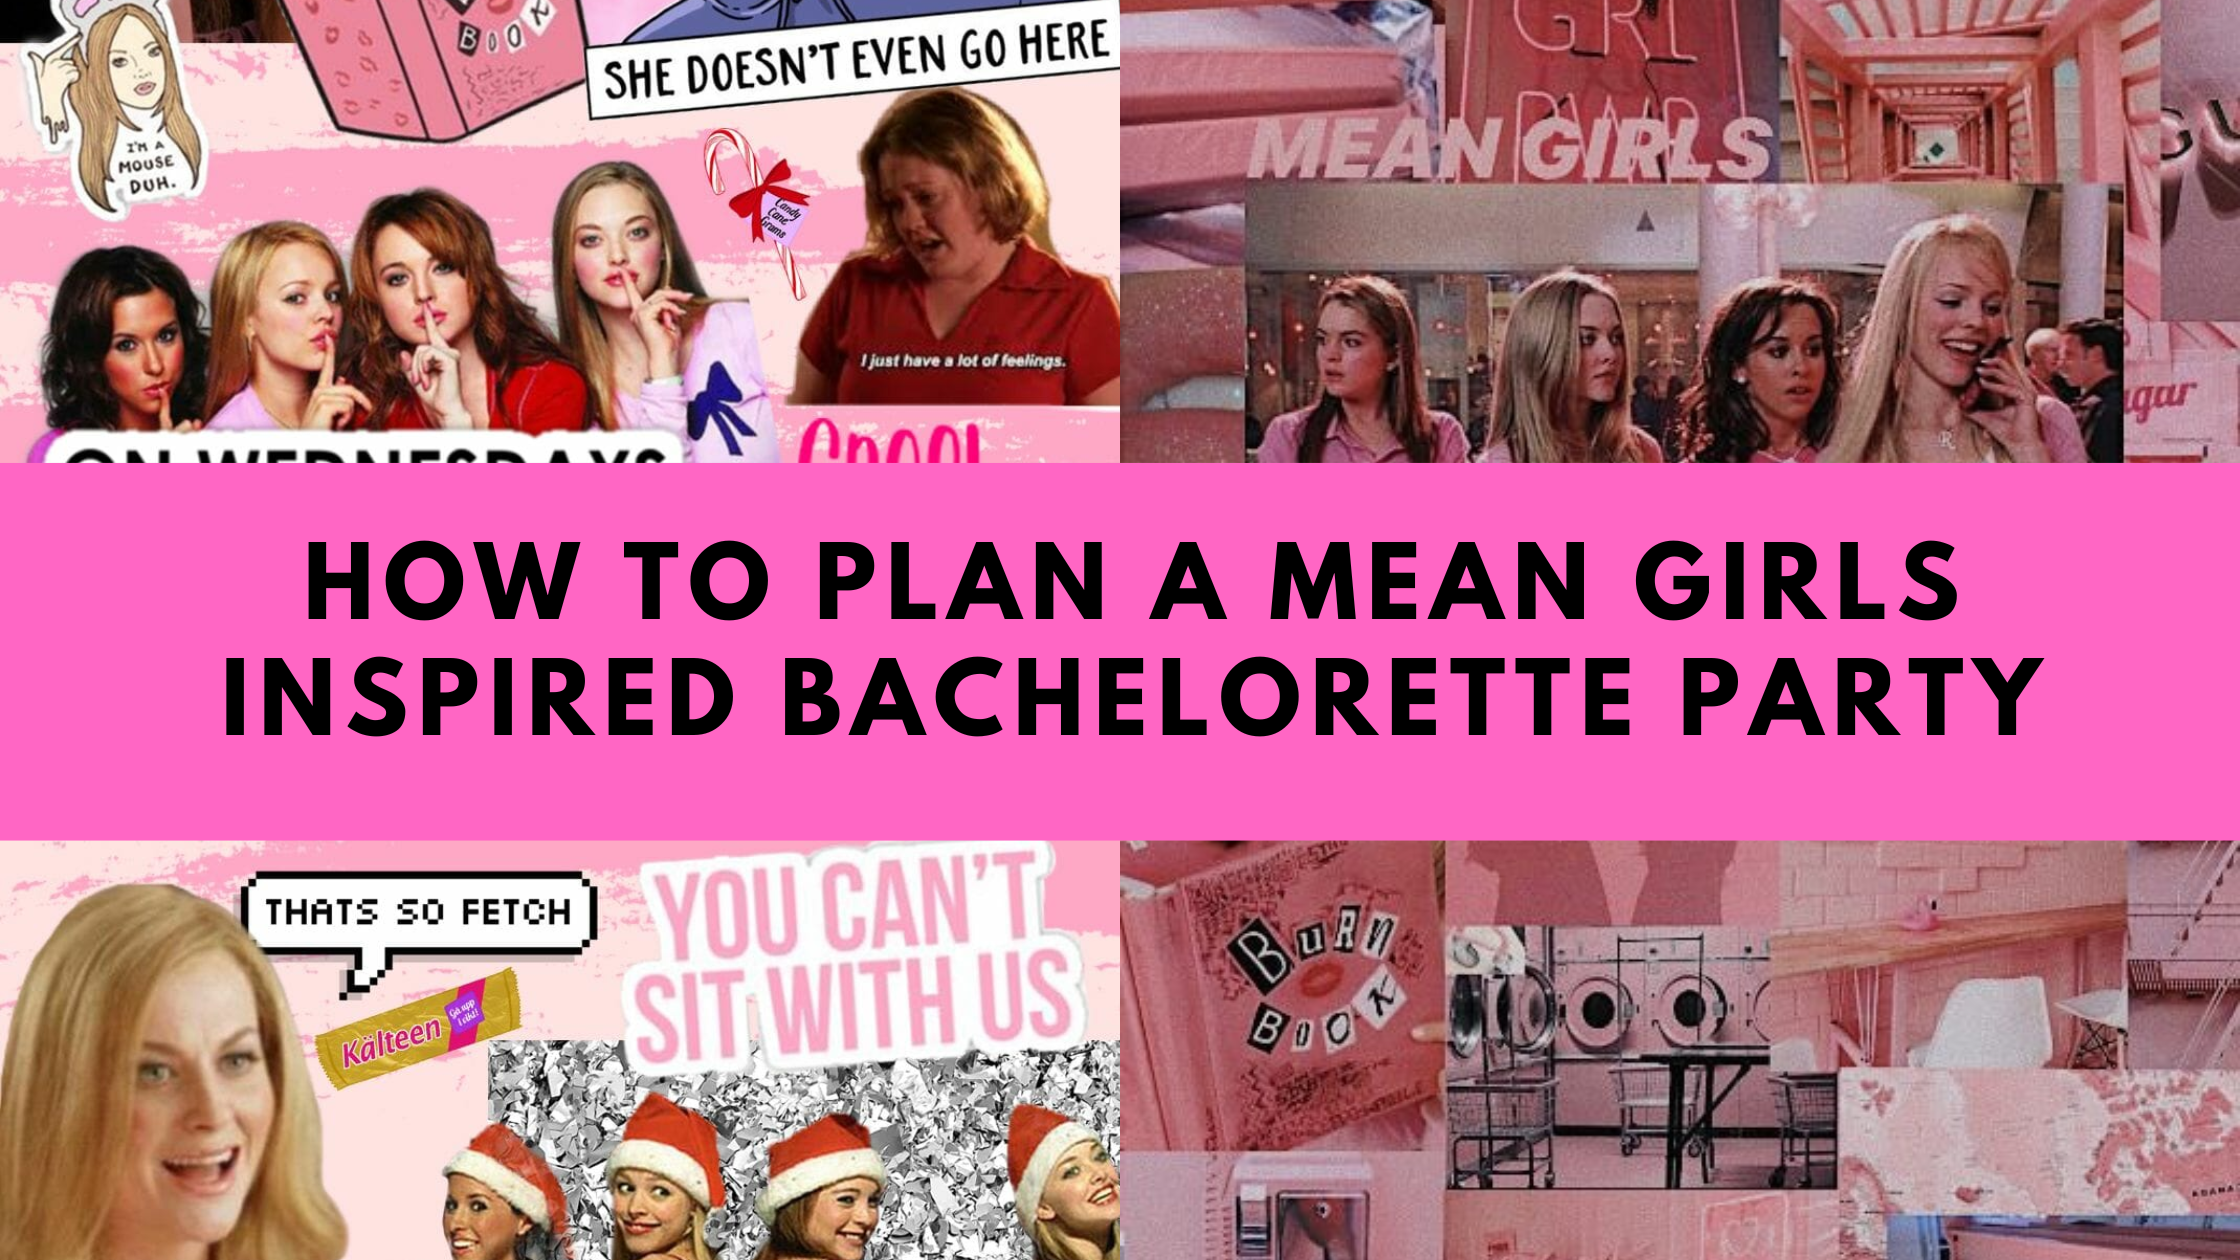 How to Plan a Mean Girls Inspired Bachelorette Party